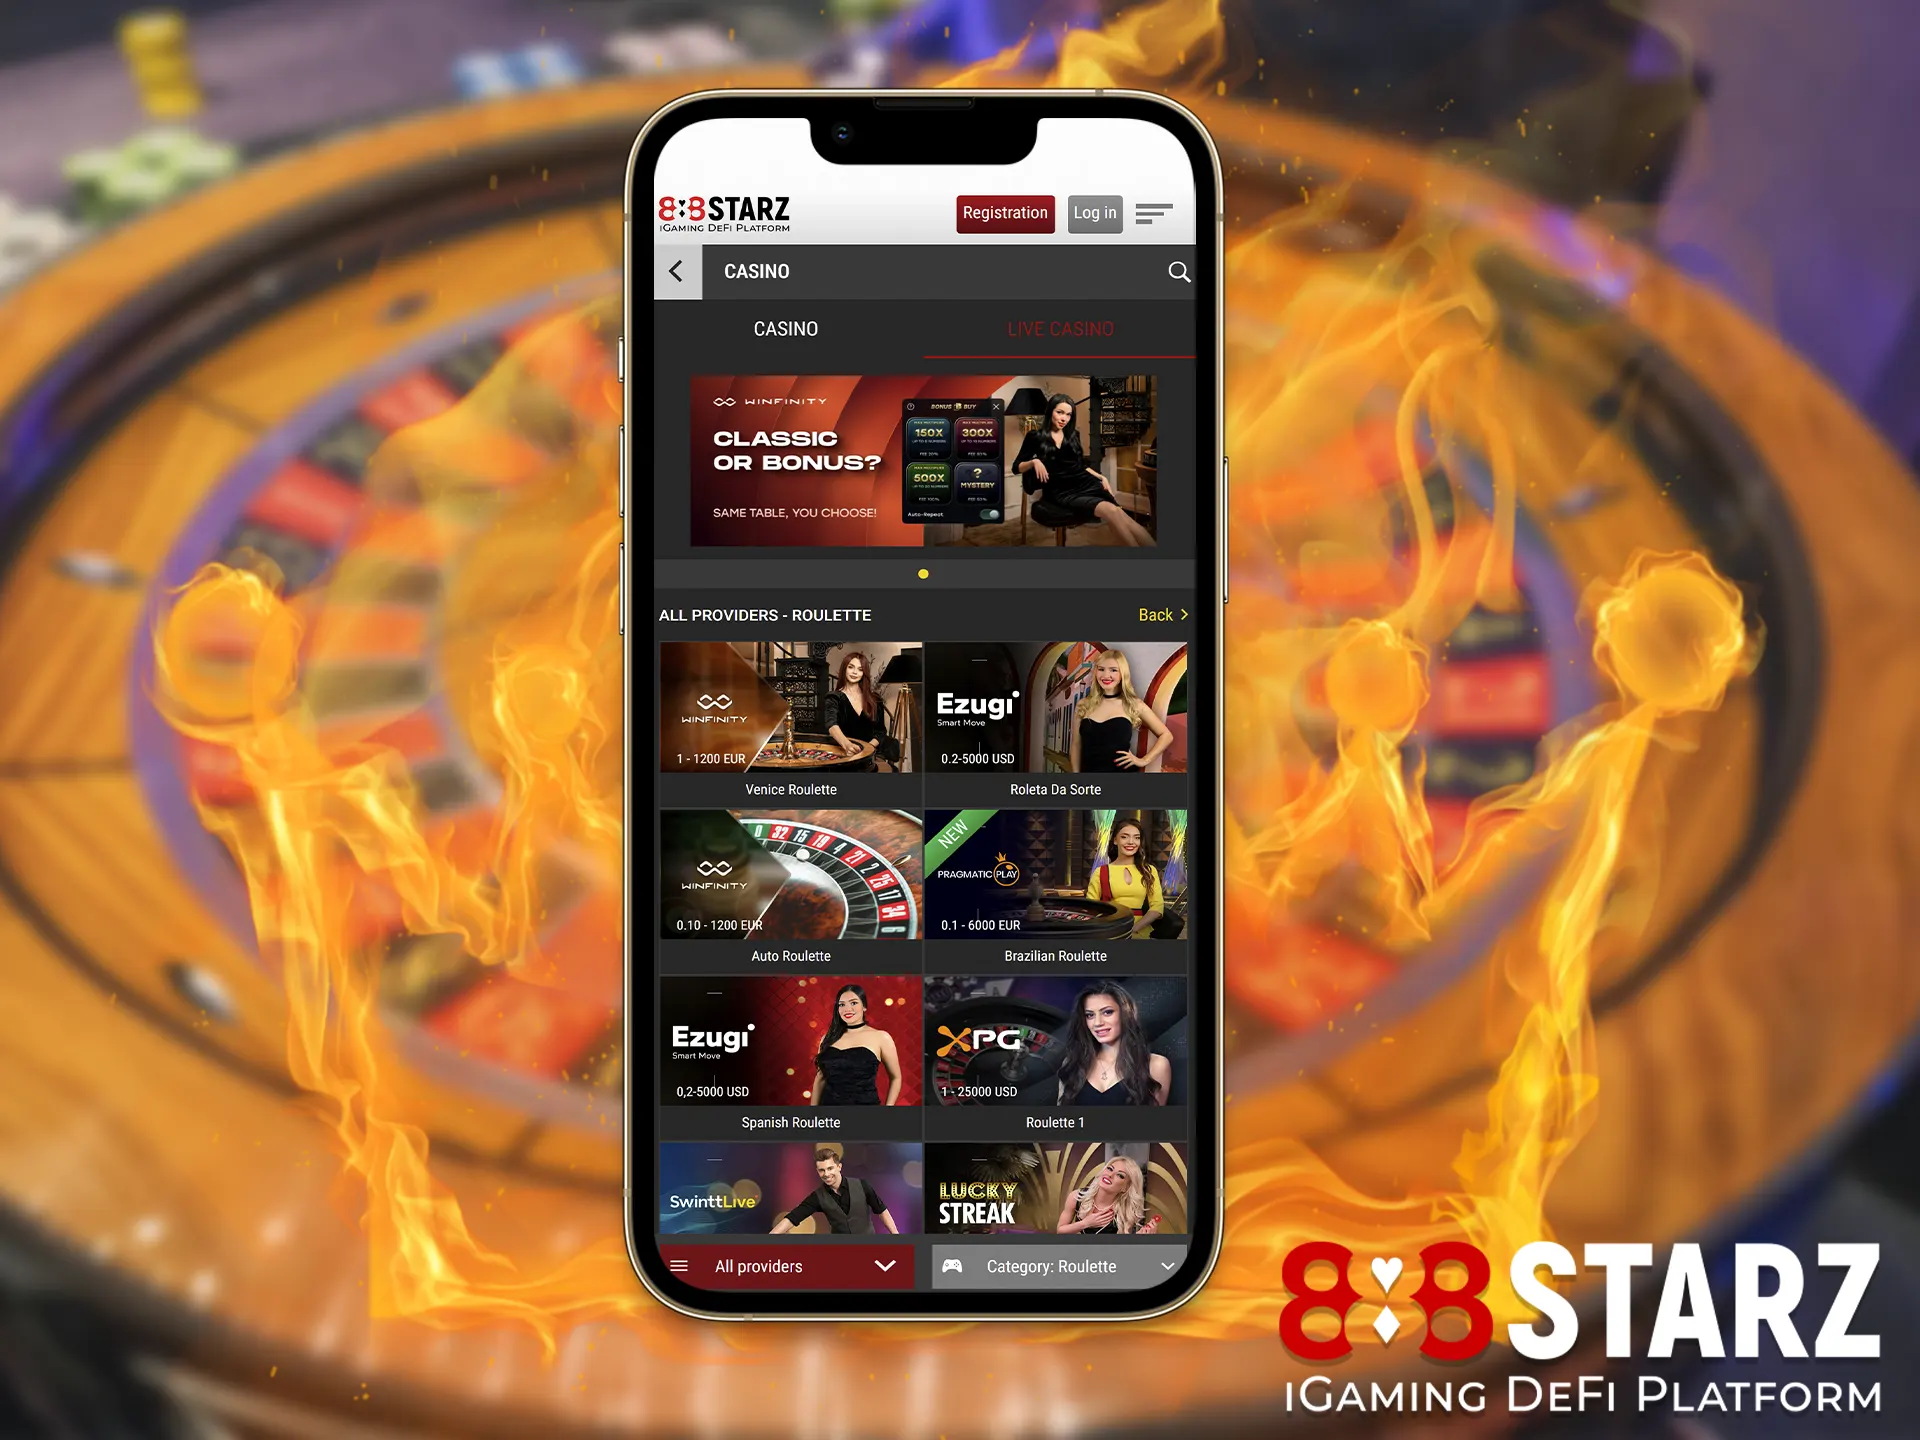 Roulette is the headliner in this category in 888starz, you will also find blackjack, poker, baccarat and other types of gambling games here.